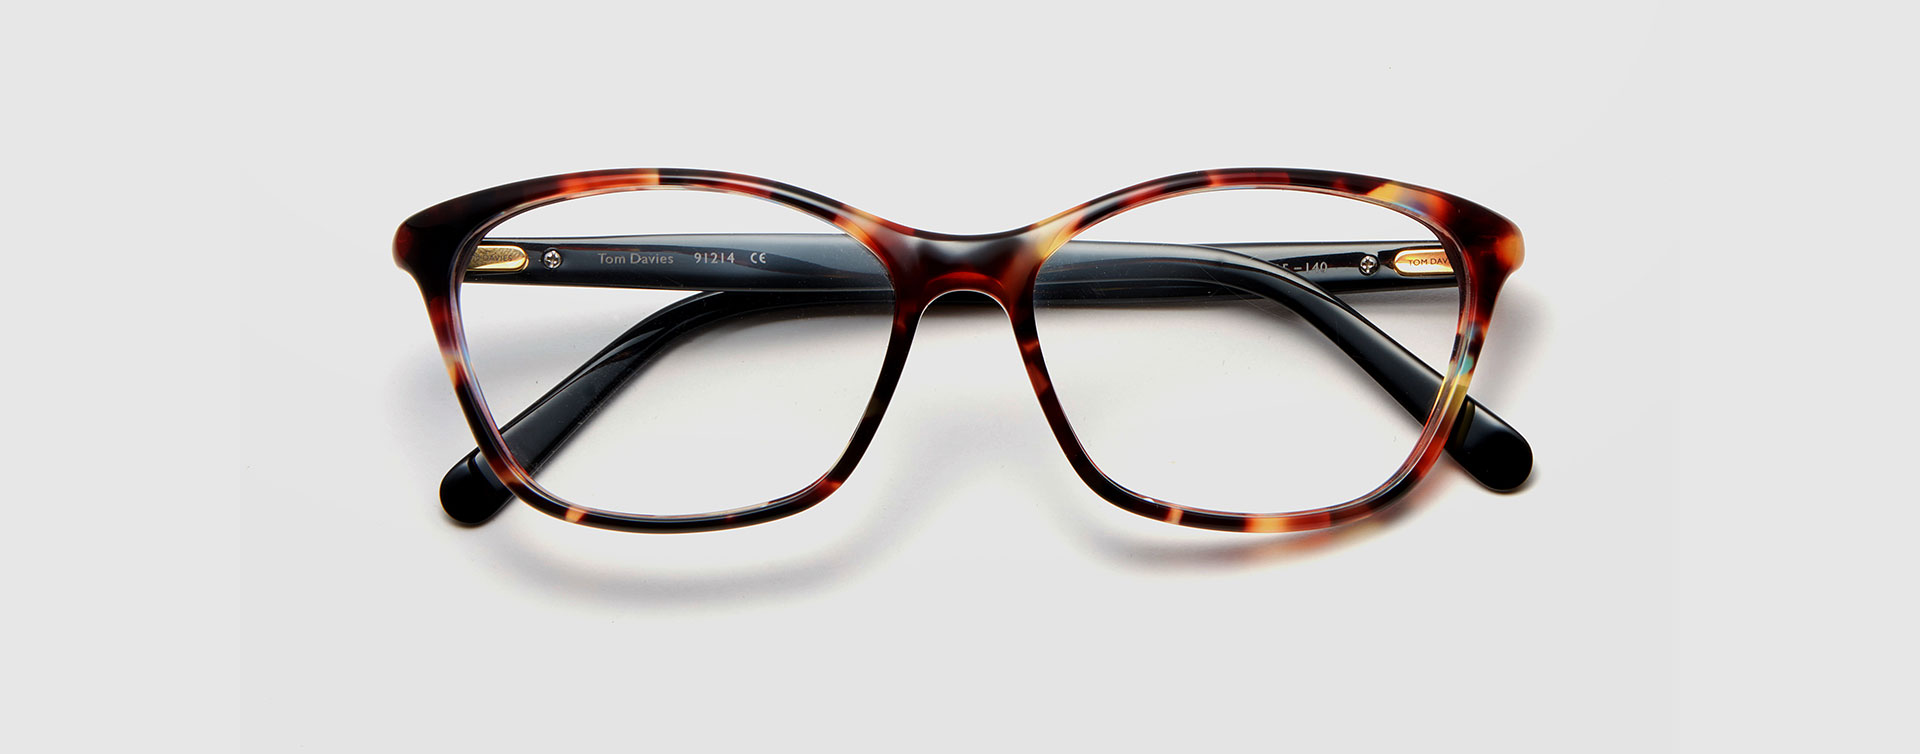 Limited edition acetate frame LE91214 by Tom Davies